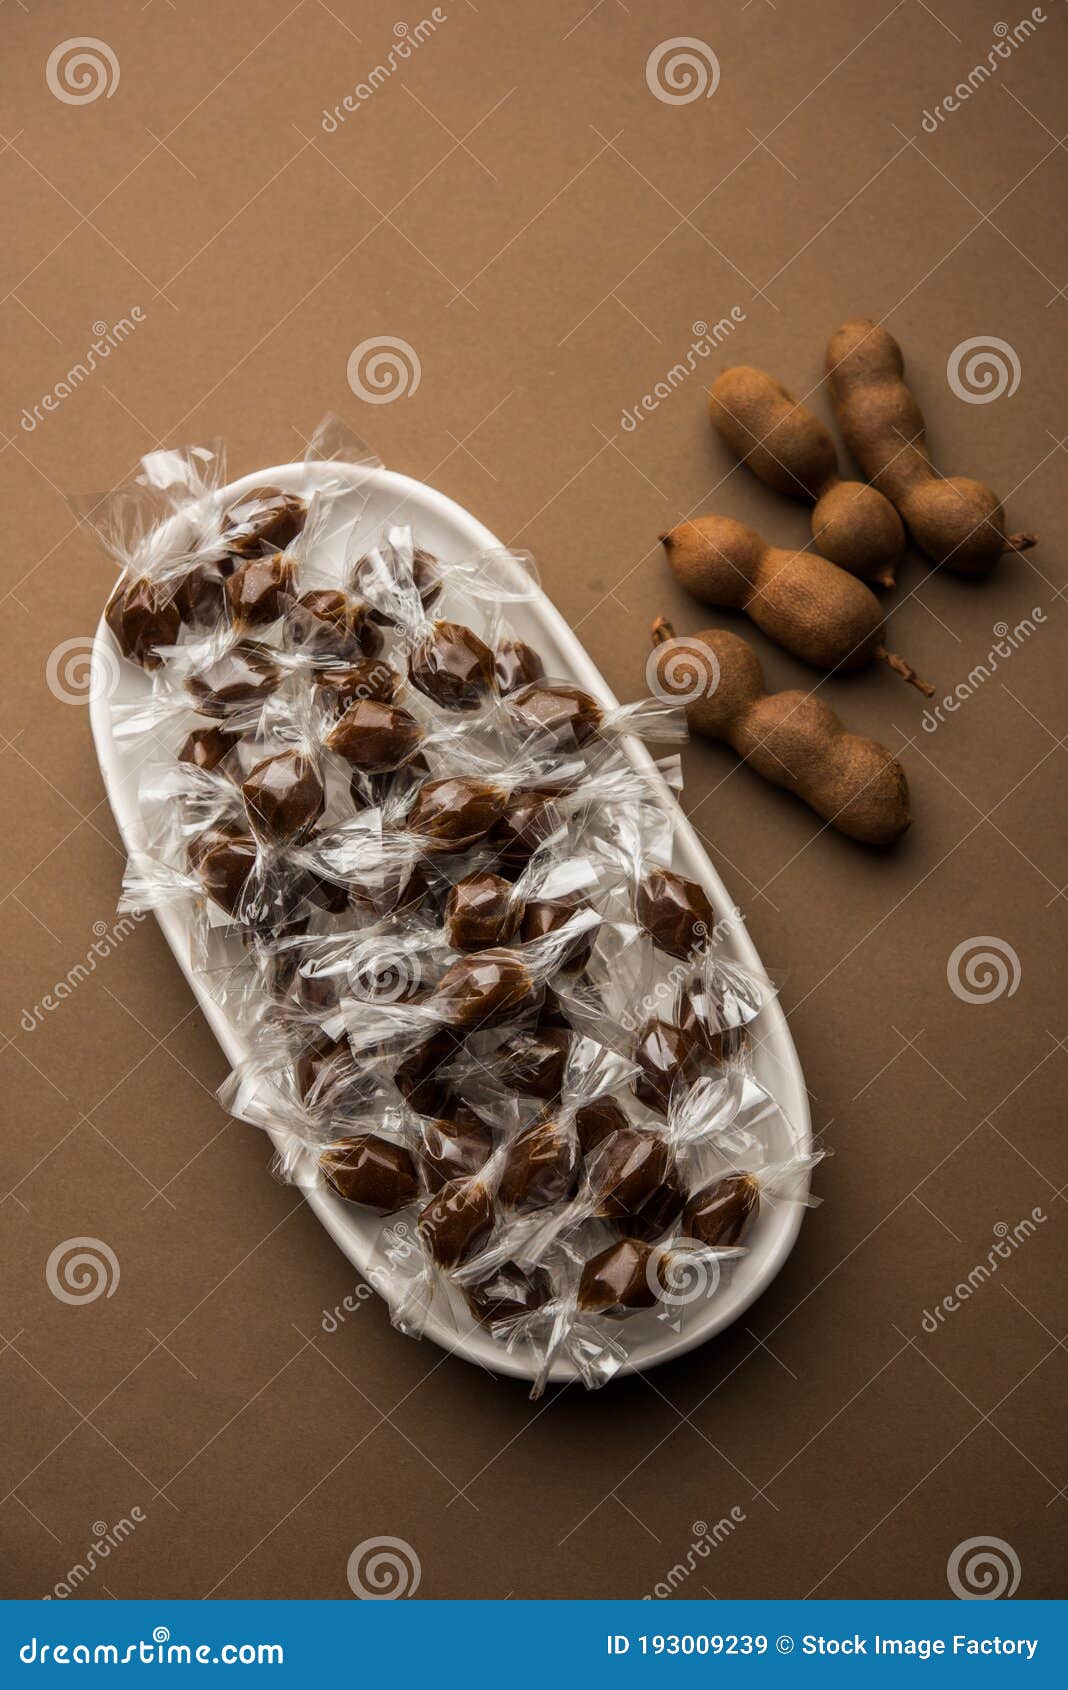 1 072 Tamarind Candy Photos Free Royalty Free Stock Photos From Dreamstime